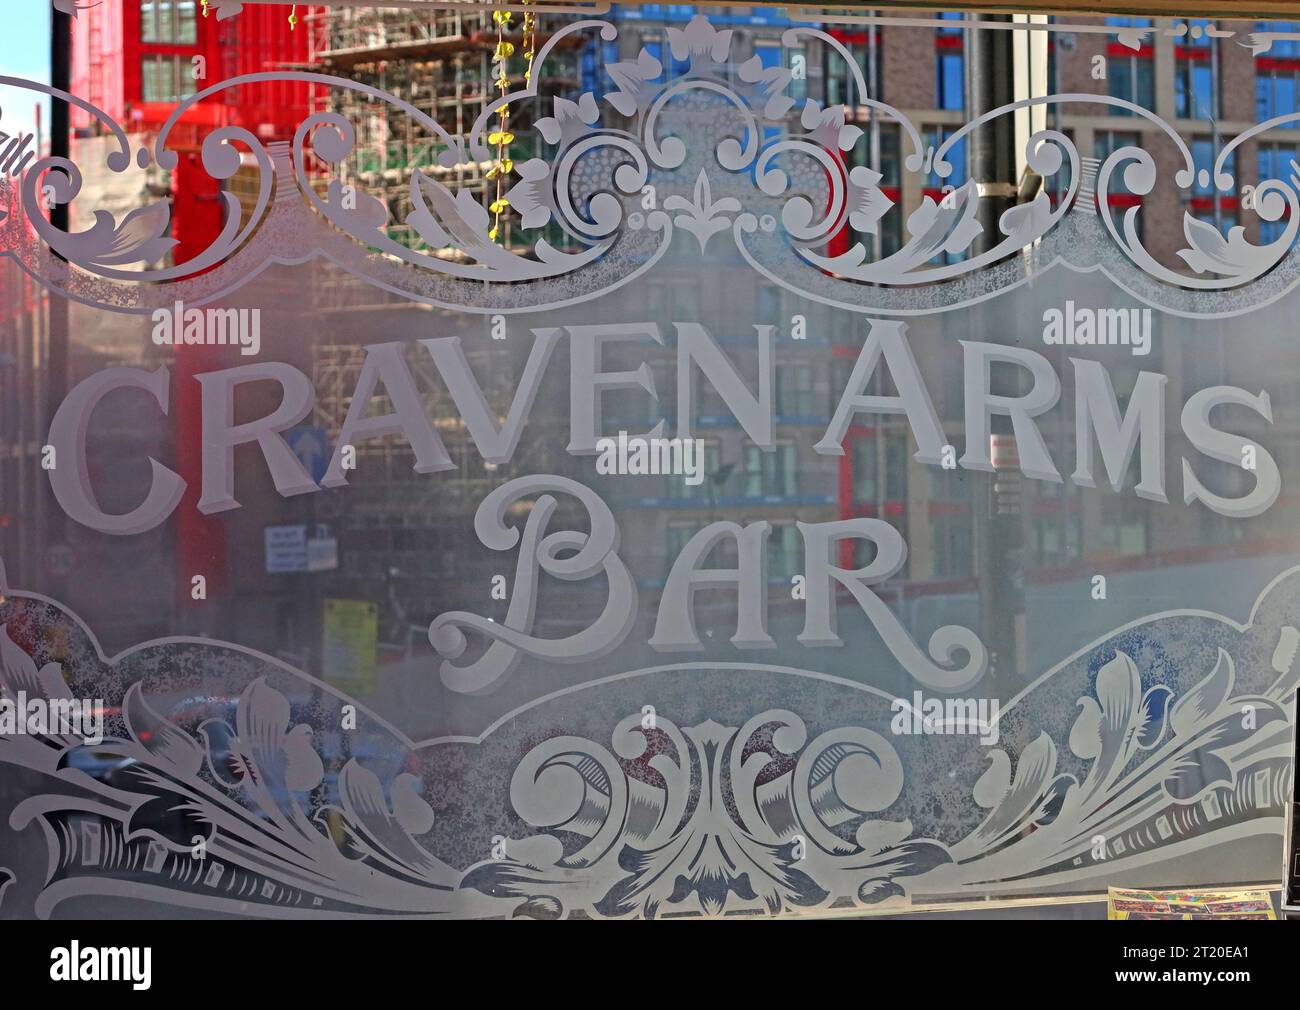 Traditional real ale pub stained glass bar window, The Craven Arms, 47 Upper Gough St, Birmingham, West Midlands, England, UK,  B1 1JL Stock Photo